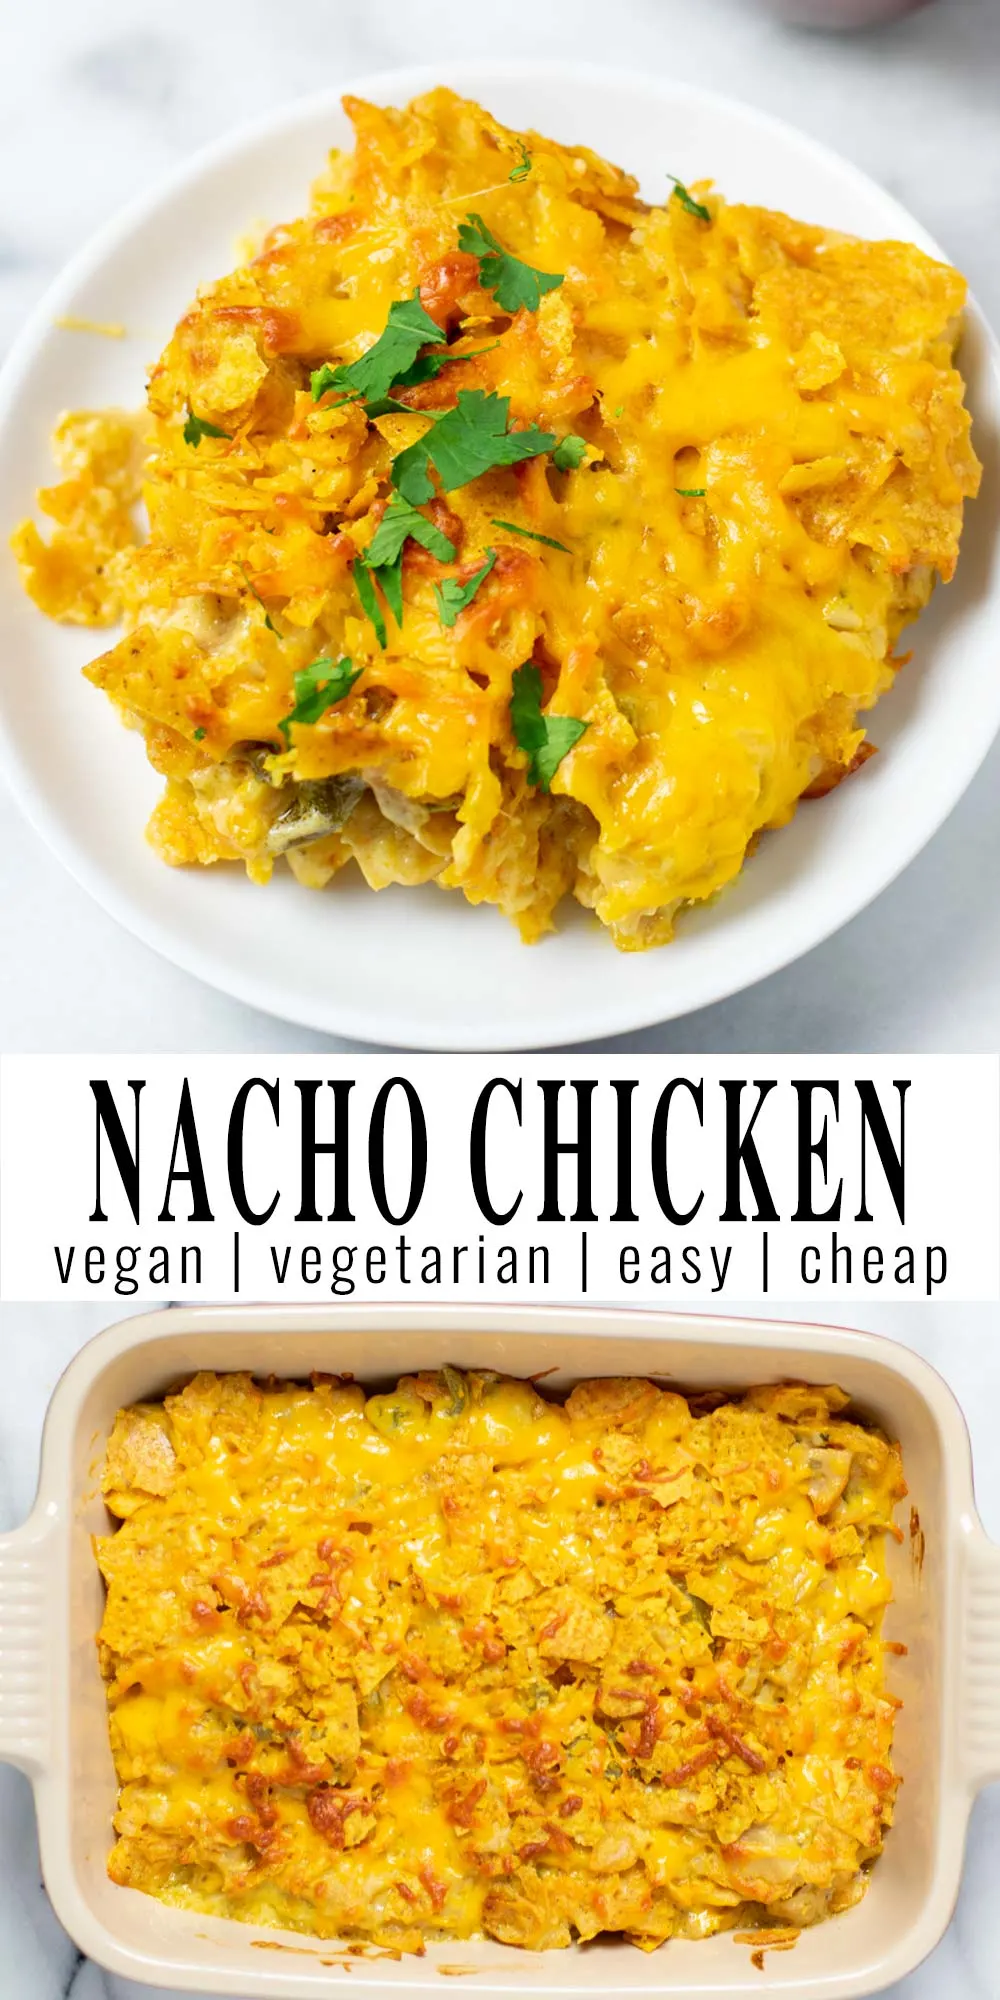 Collage of two pictures of the Nacho Chicken with recipe title text.